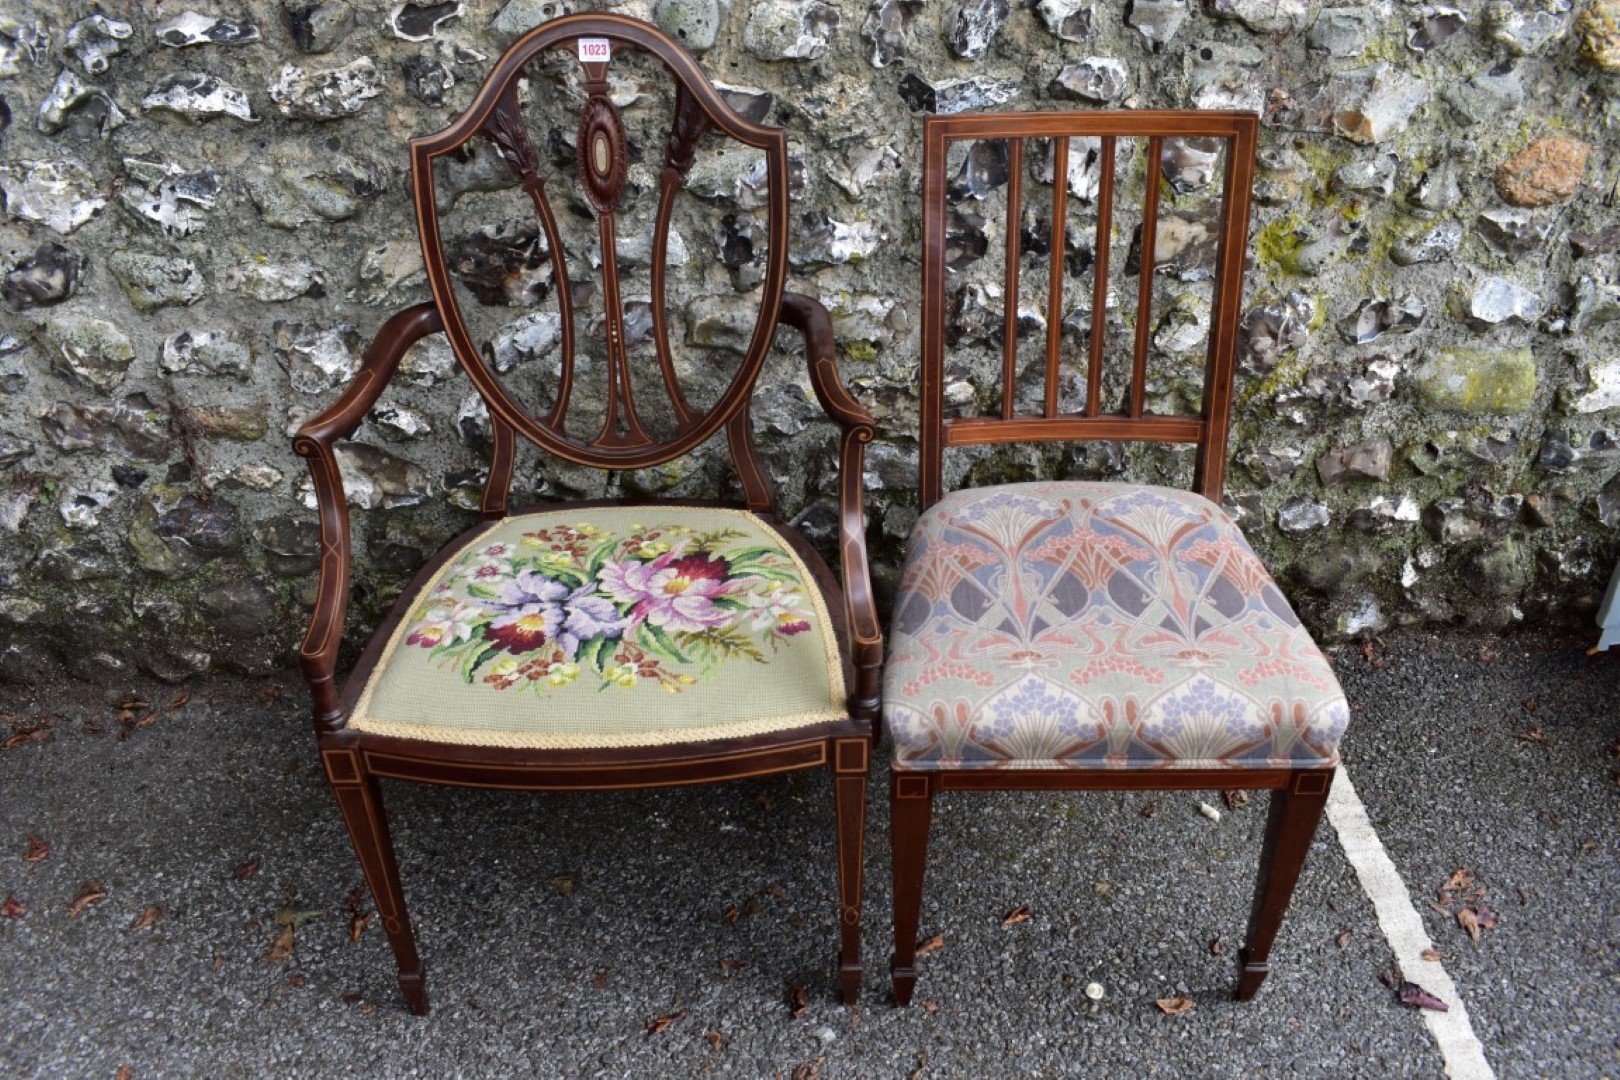 An Edwardian salon elbow chair; and another chair.